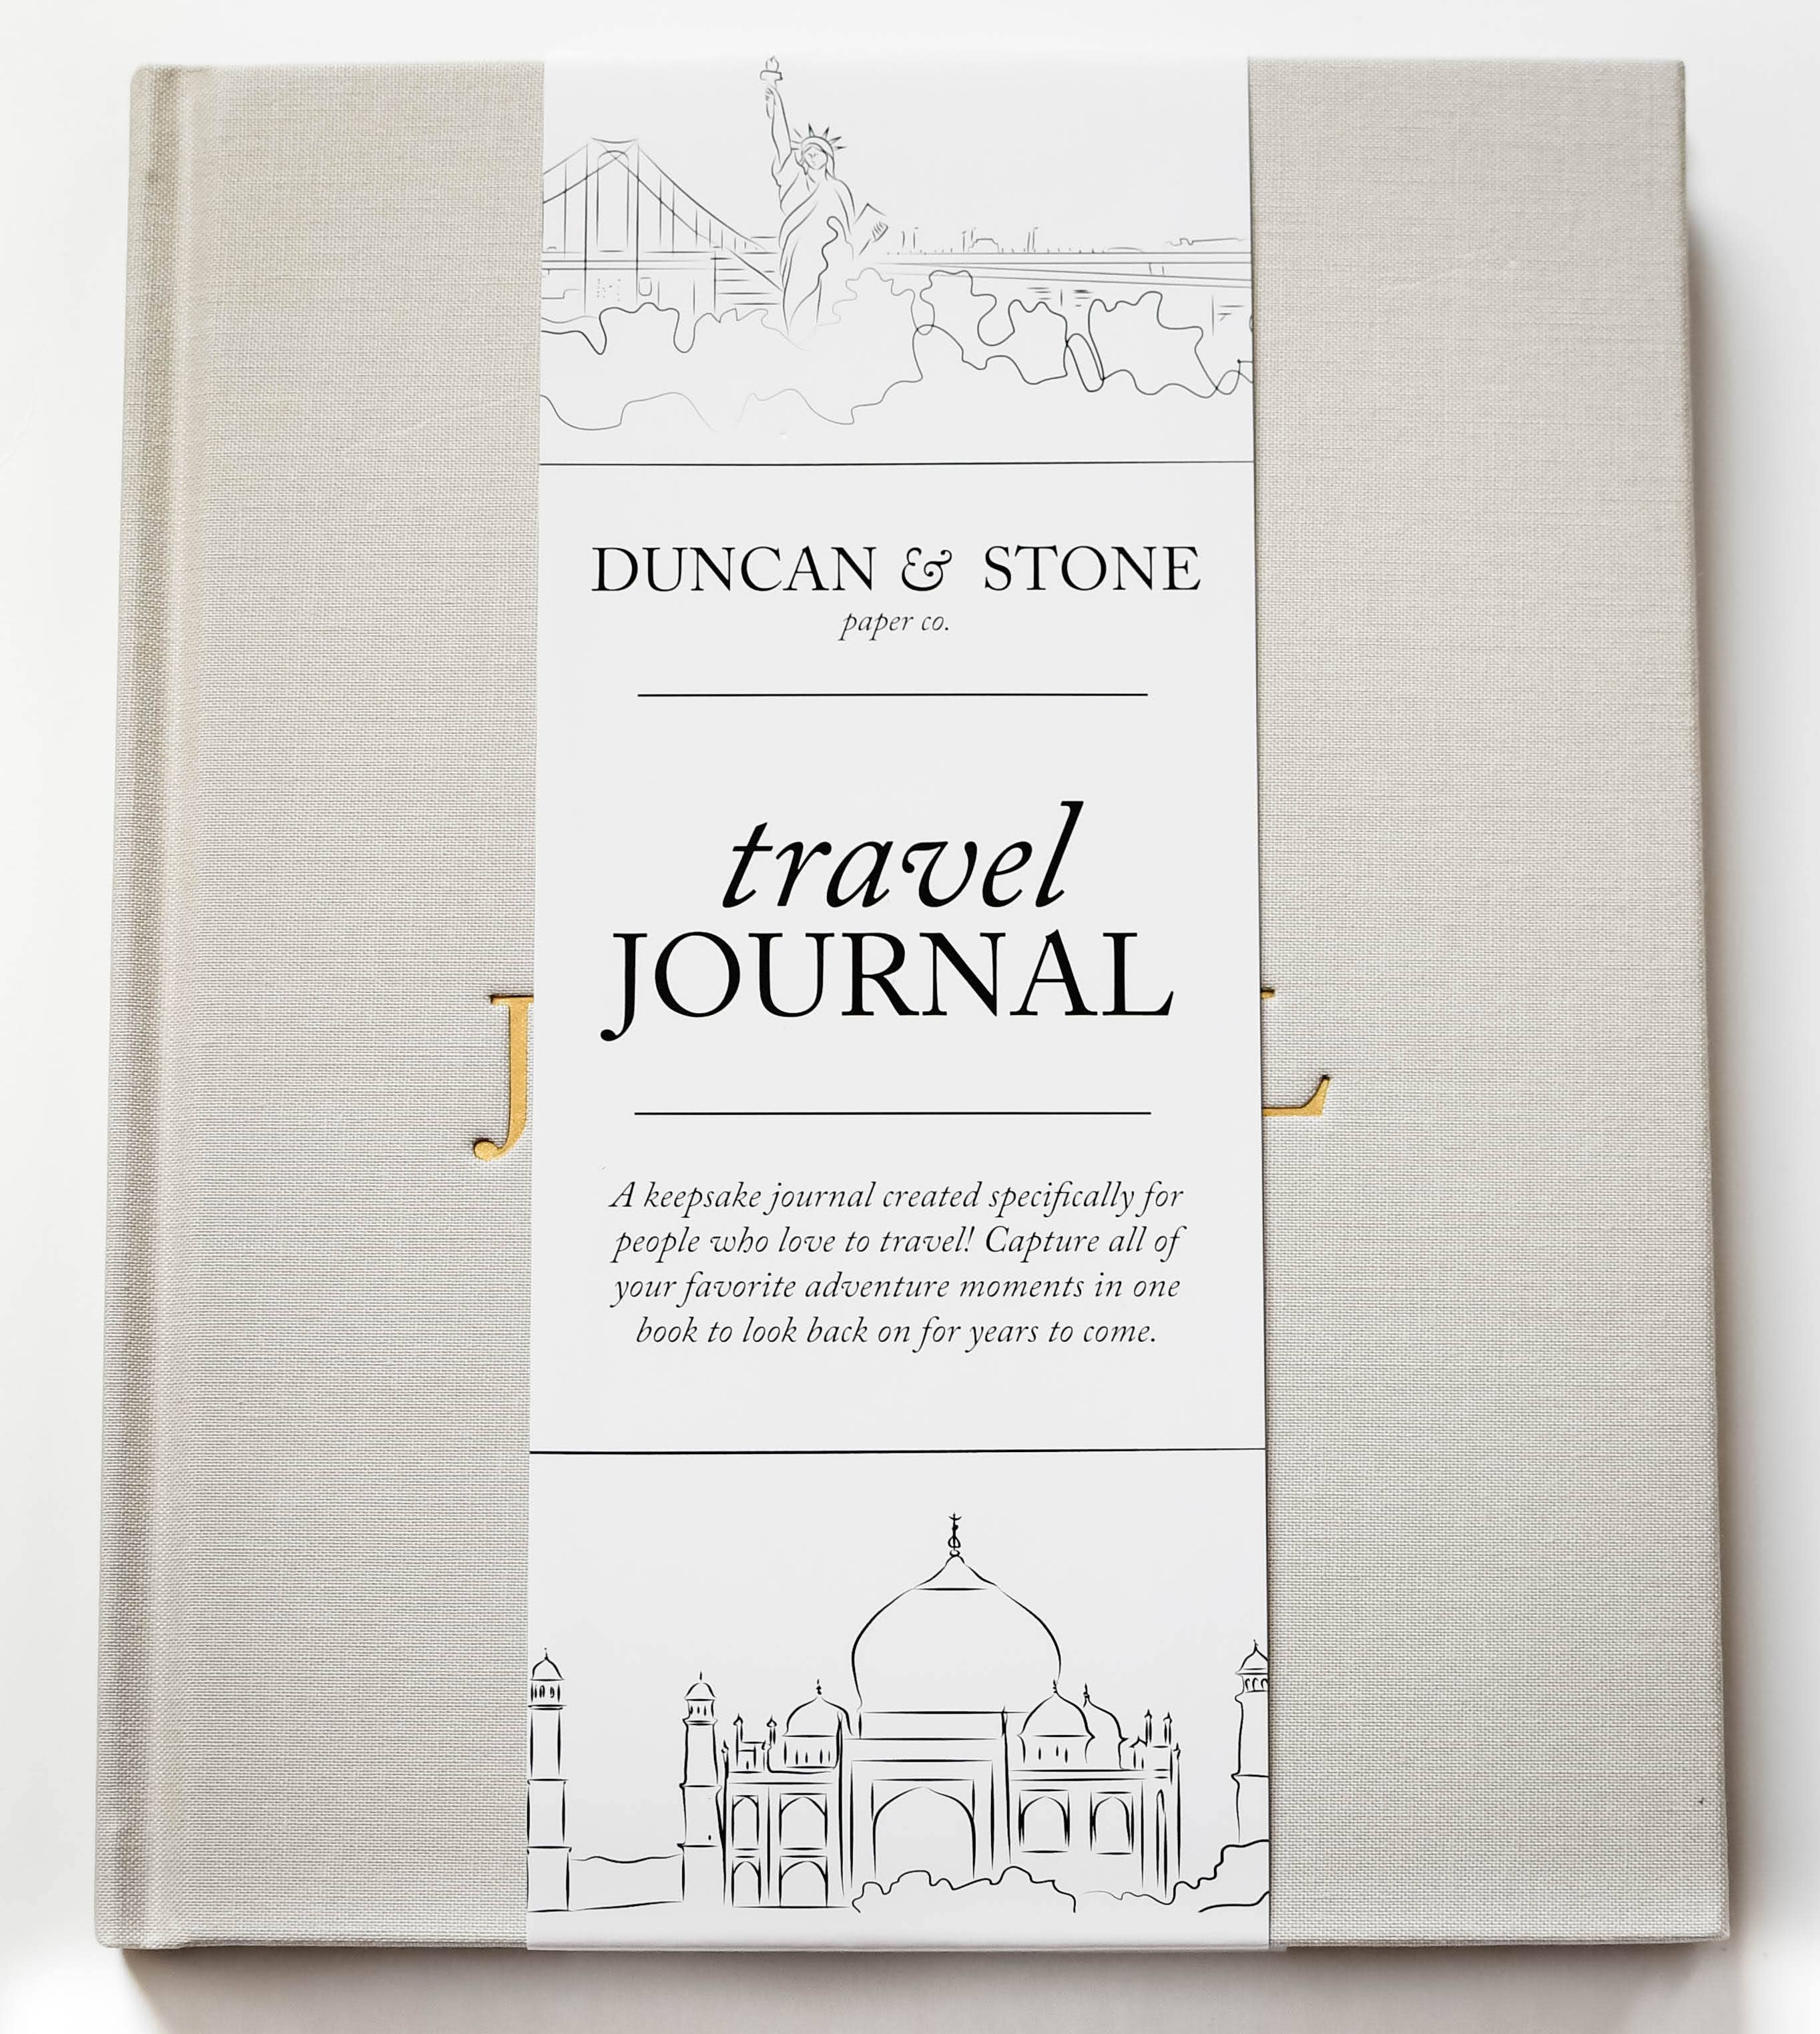 Duncan and Stone + Travel Journal And Photo Album